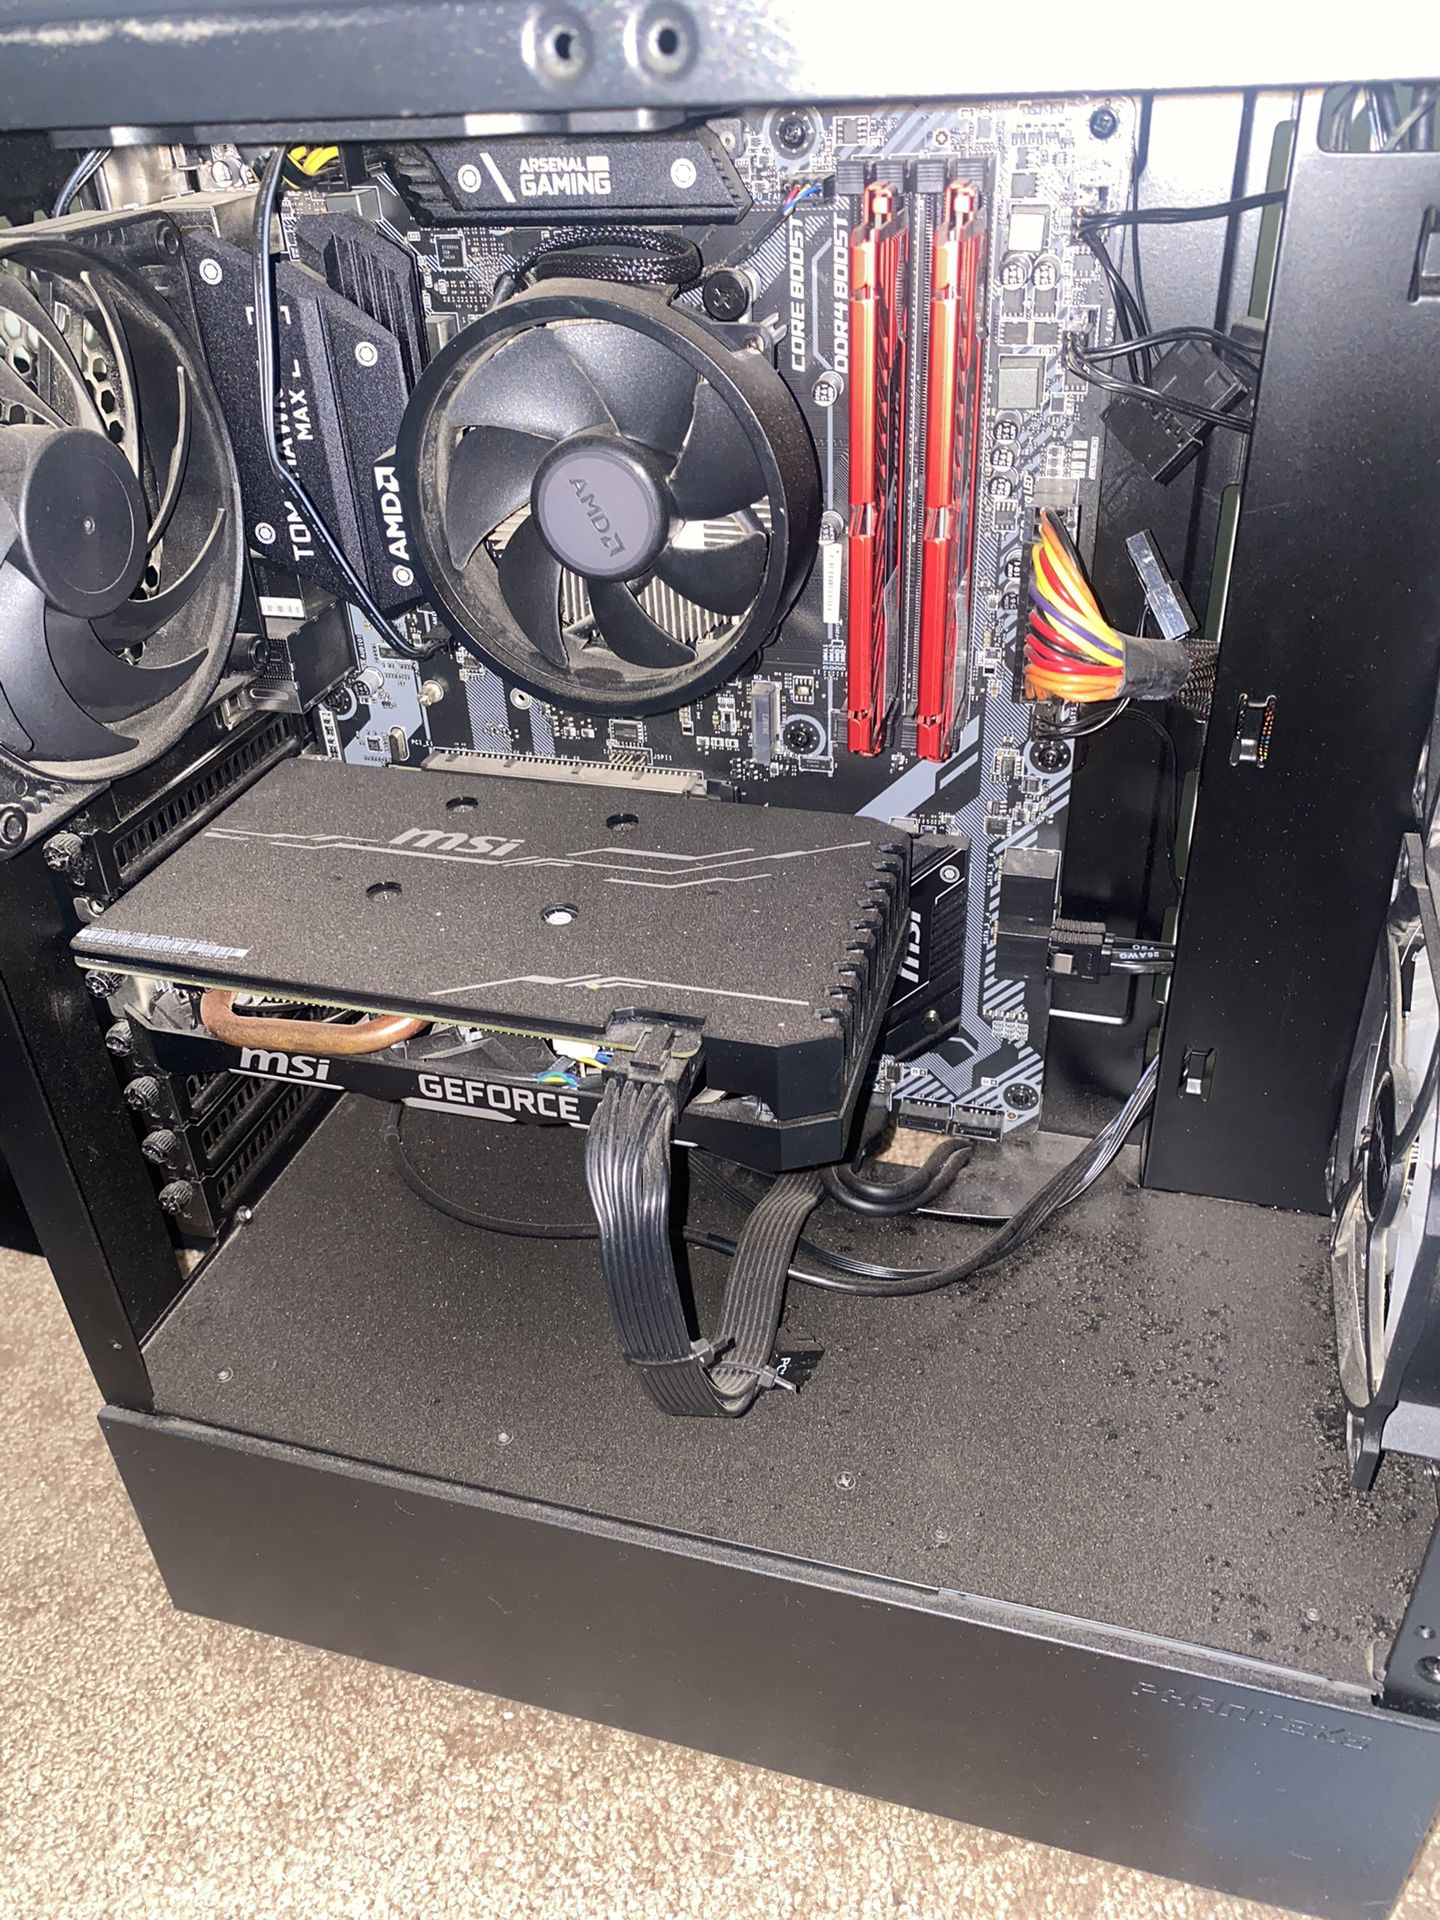 Gaming Pc For Parts 